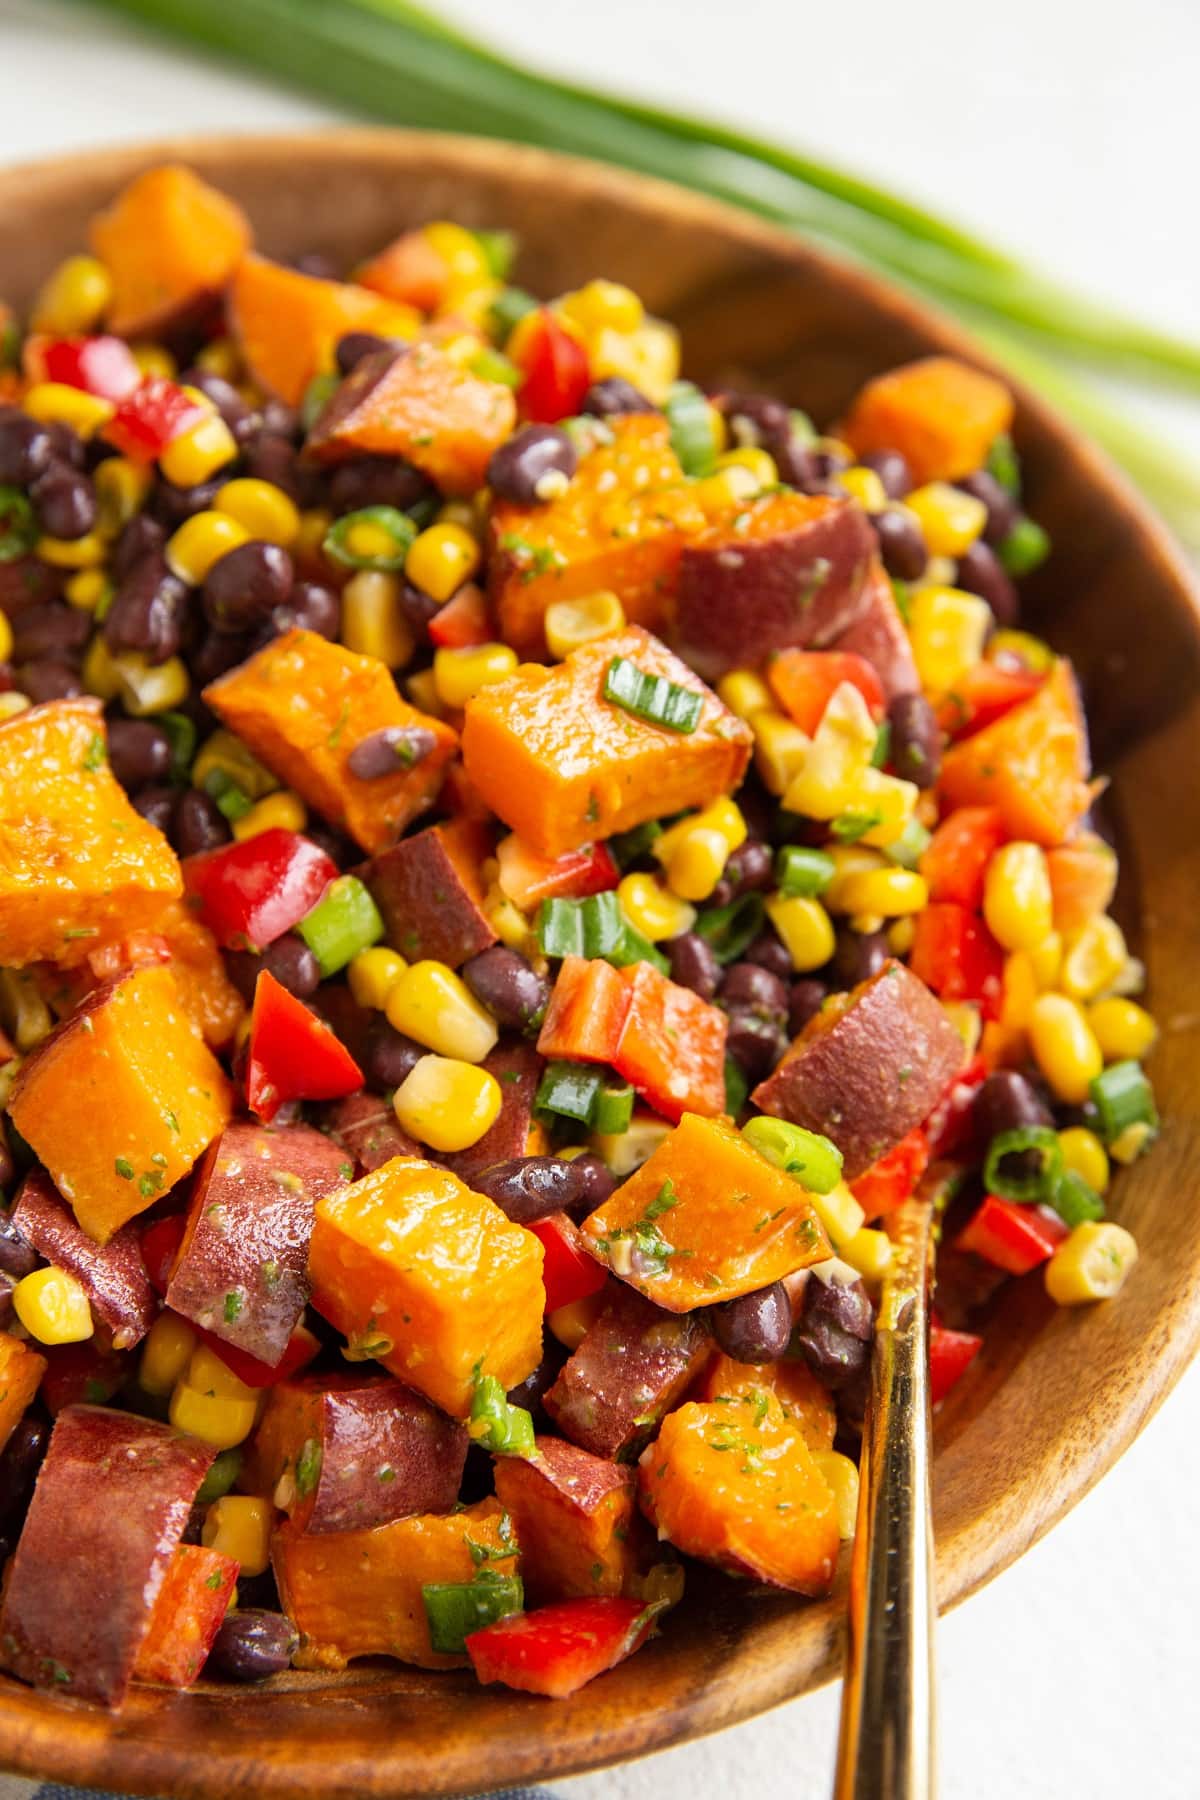 Close up image of a serving bowl full of roasted sweet potato salad with black beans, corn, and more.